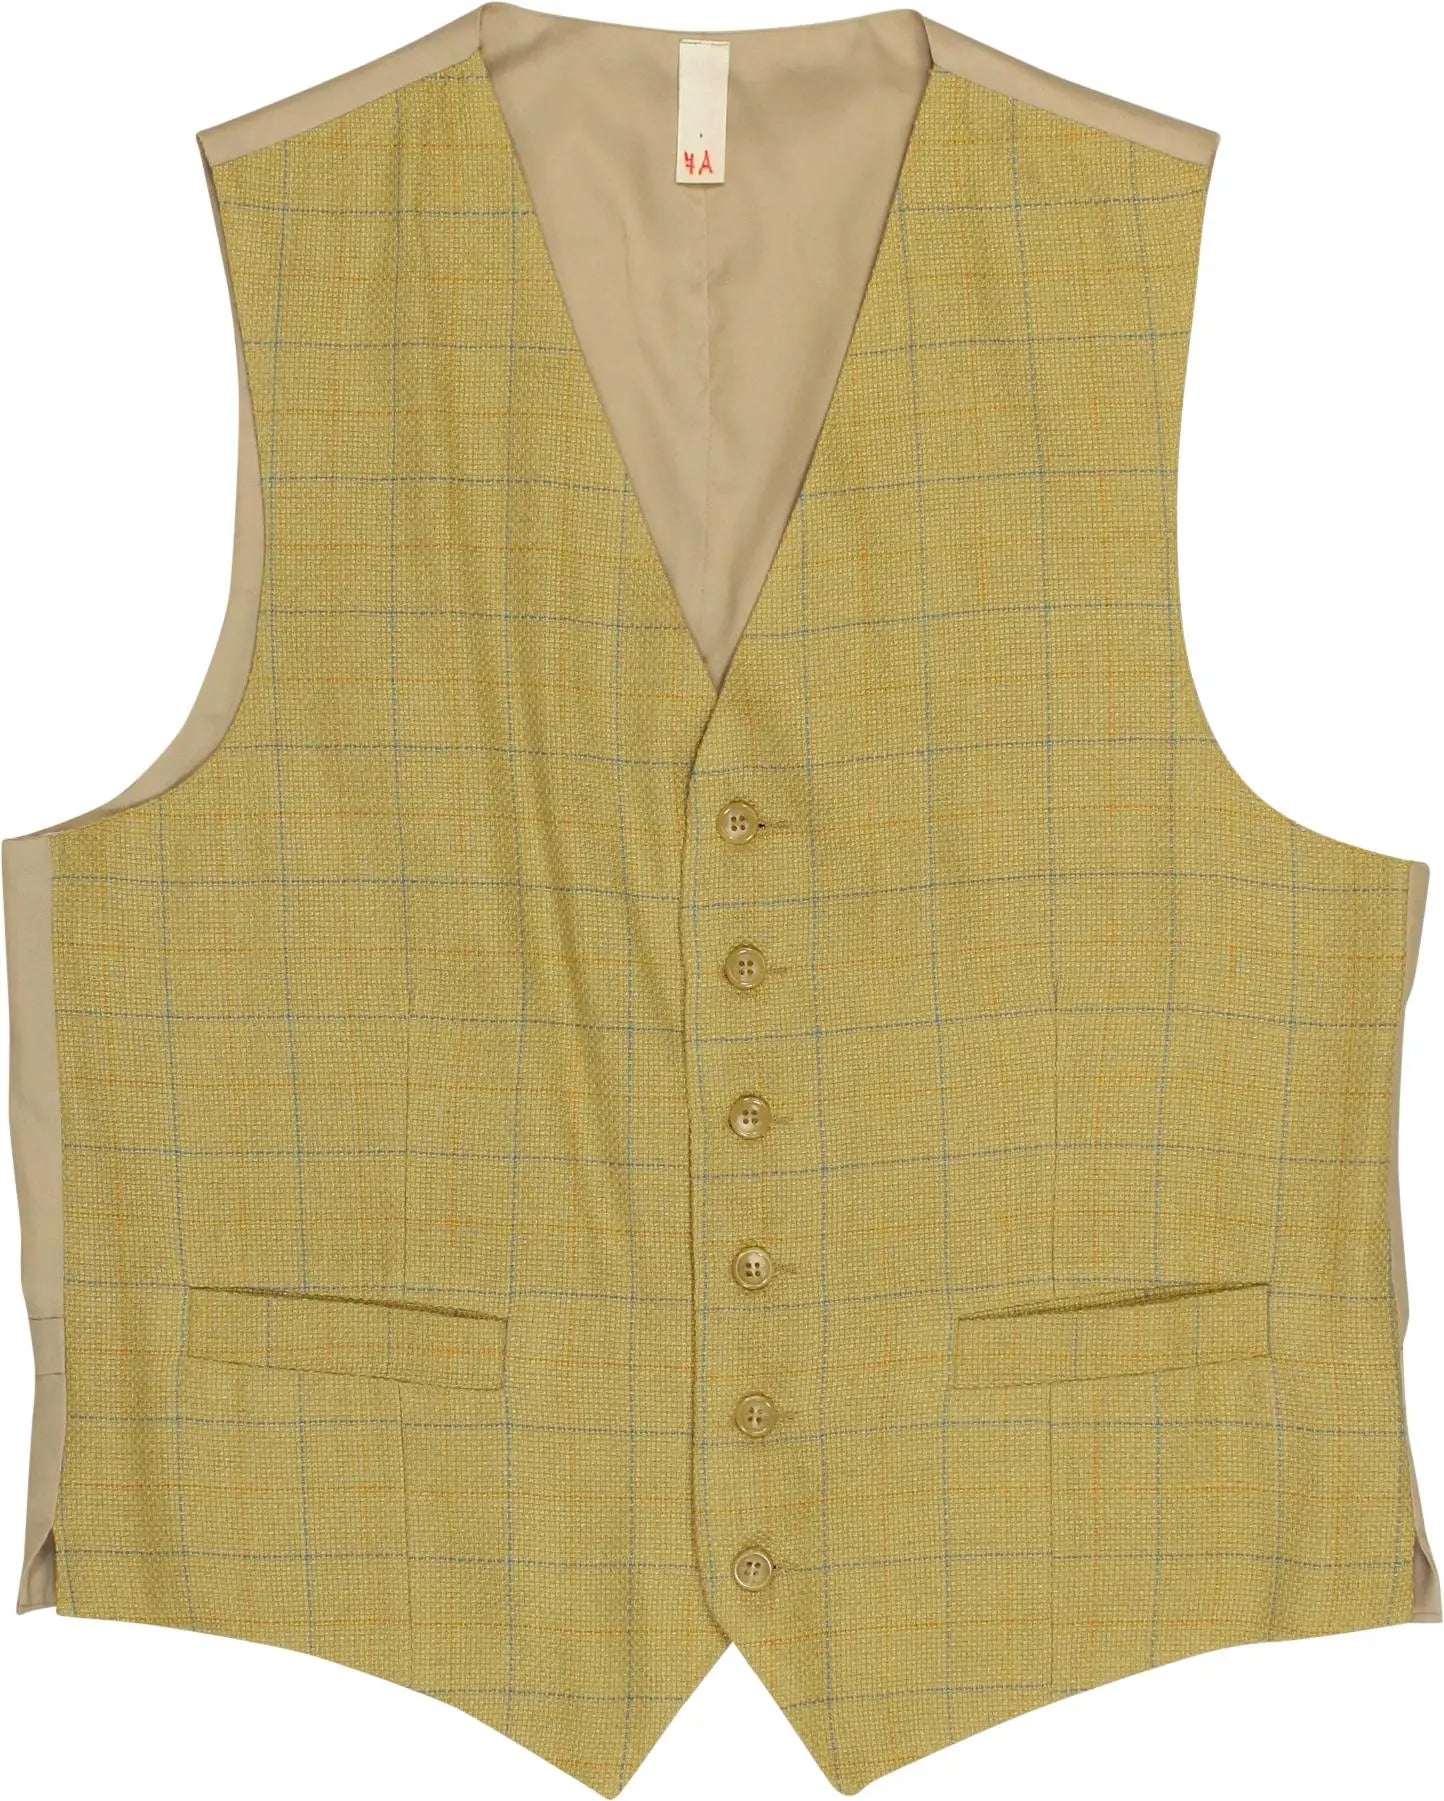 Unknown - Checkered Waistcoat- ThriftTale.com - Vintage and second handclothing